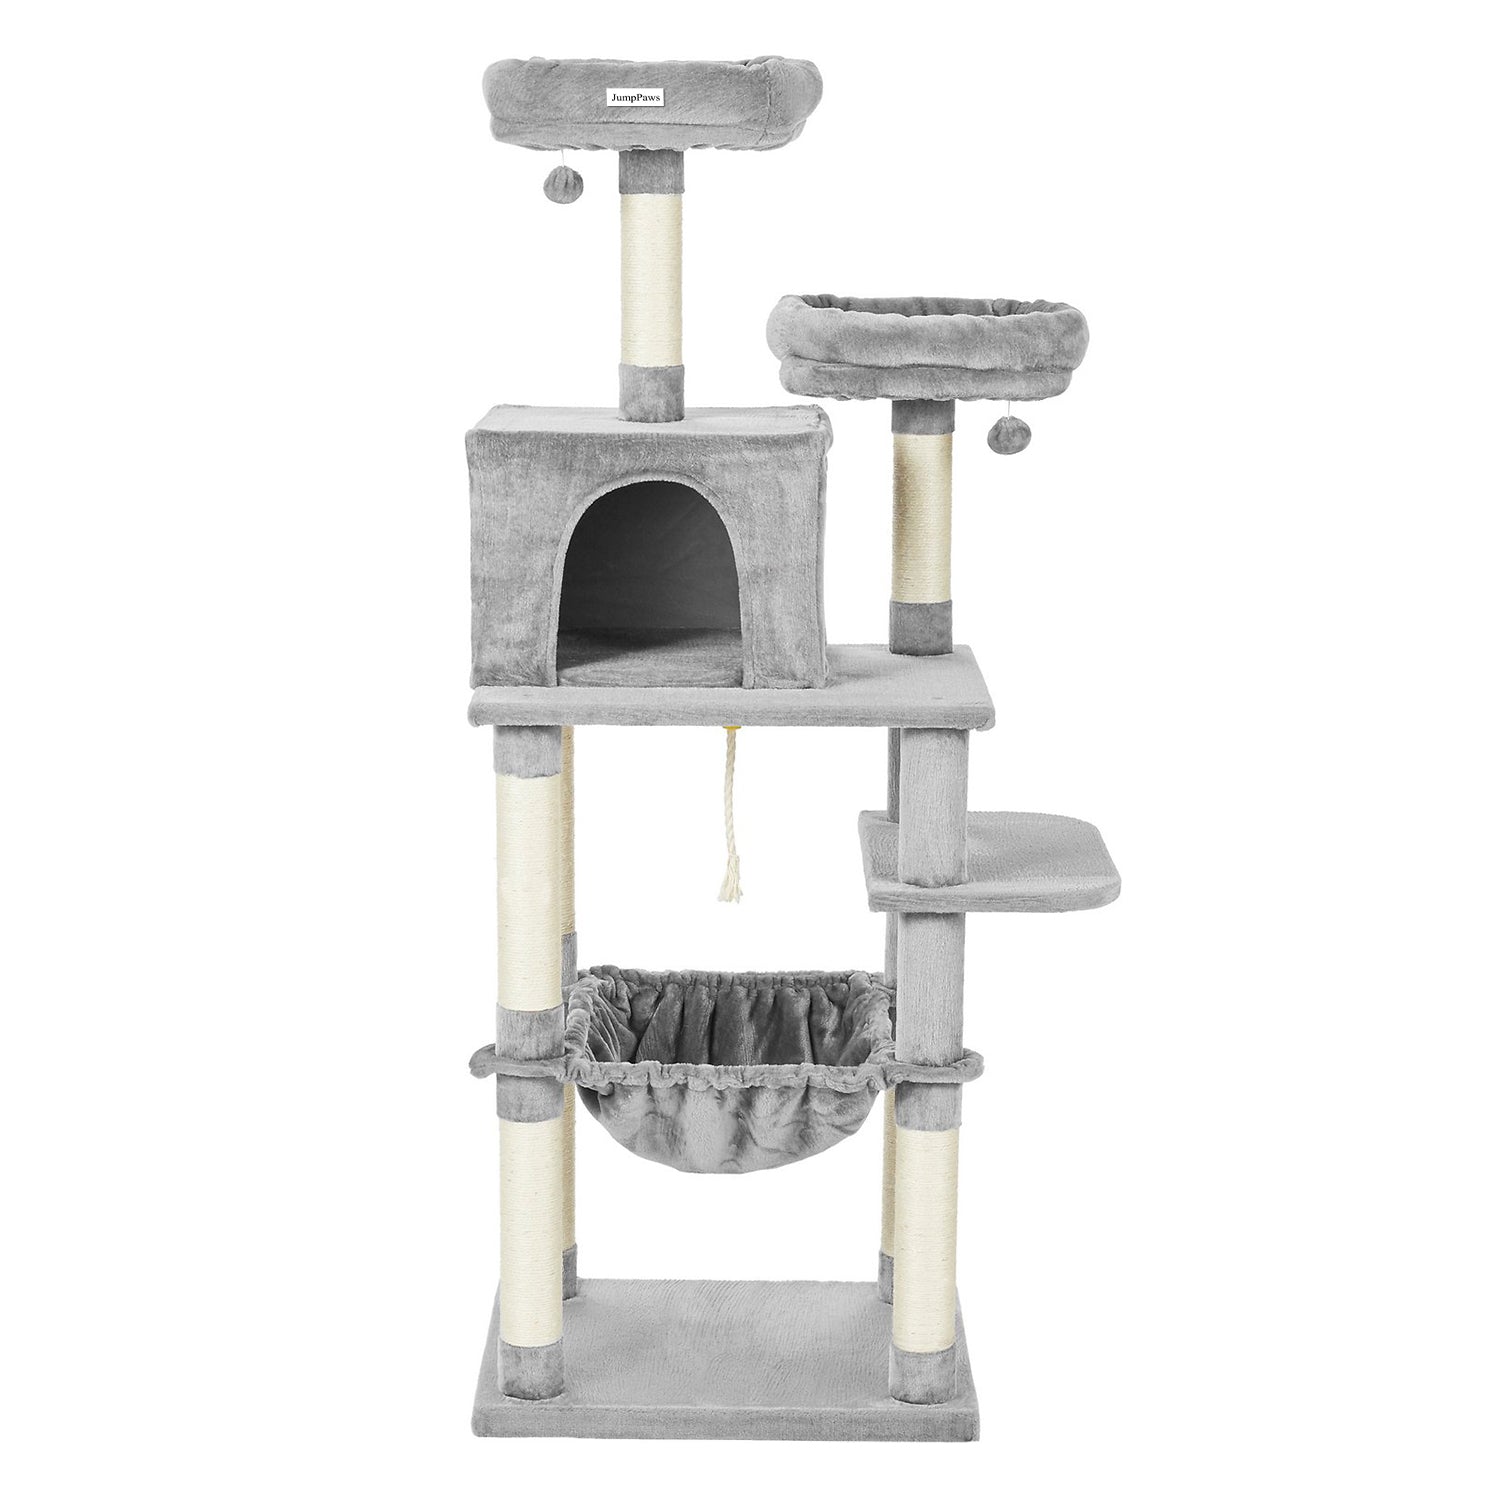 JumpPaws Cat Playhouse, Indoor Cat Tower Condo, Cat Toys and Bed & Pet Play Towers, Grey, 23.6"L x 19.1"W x 64"H